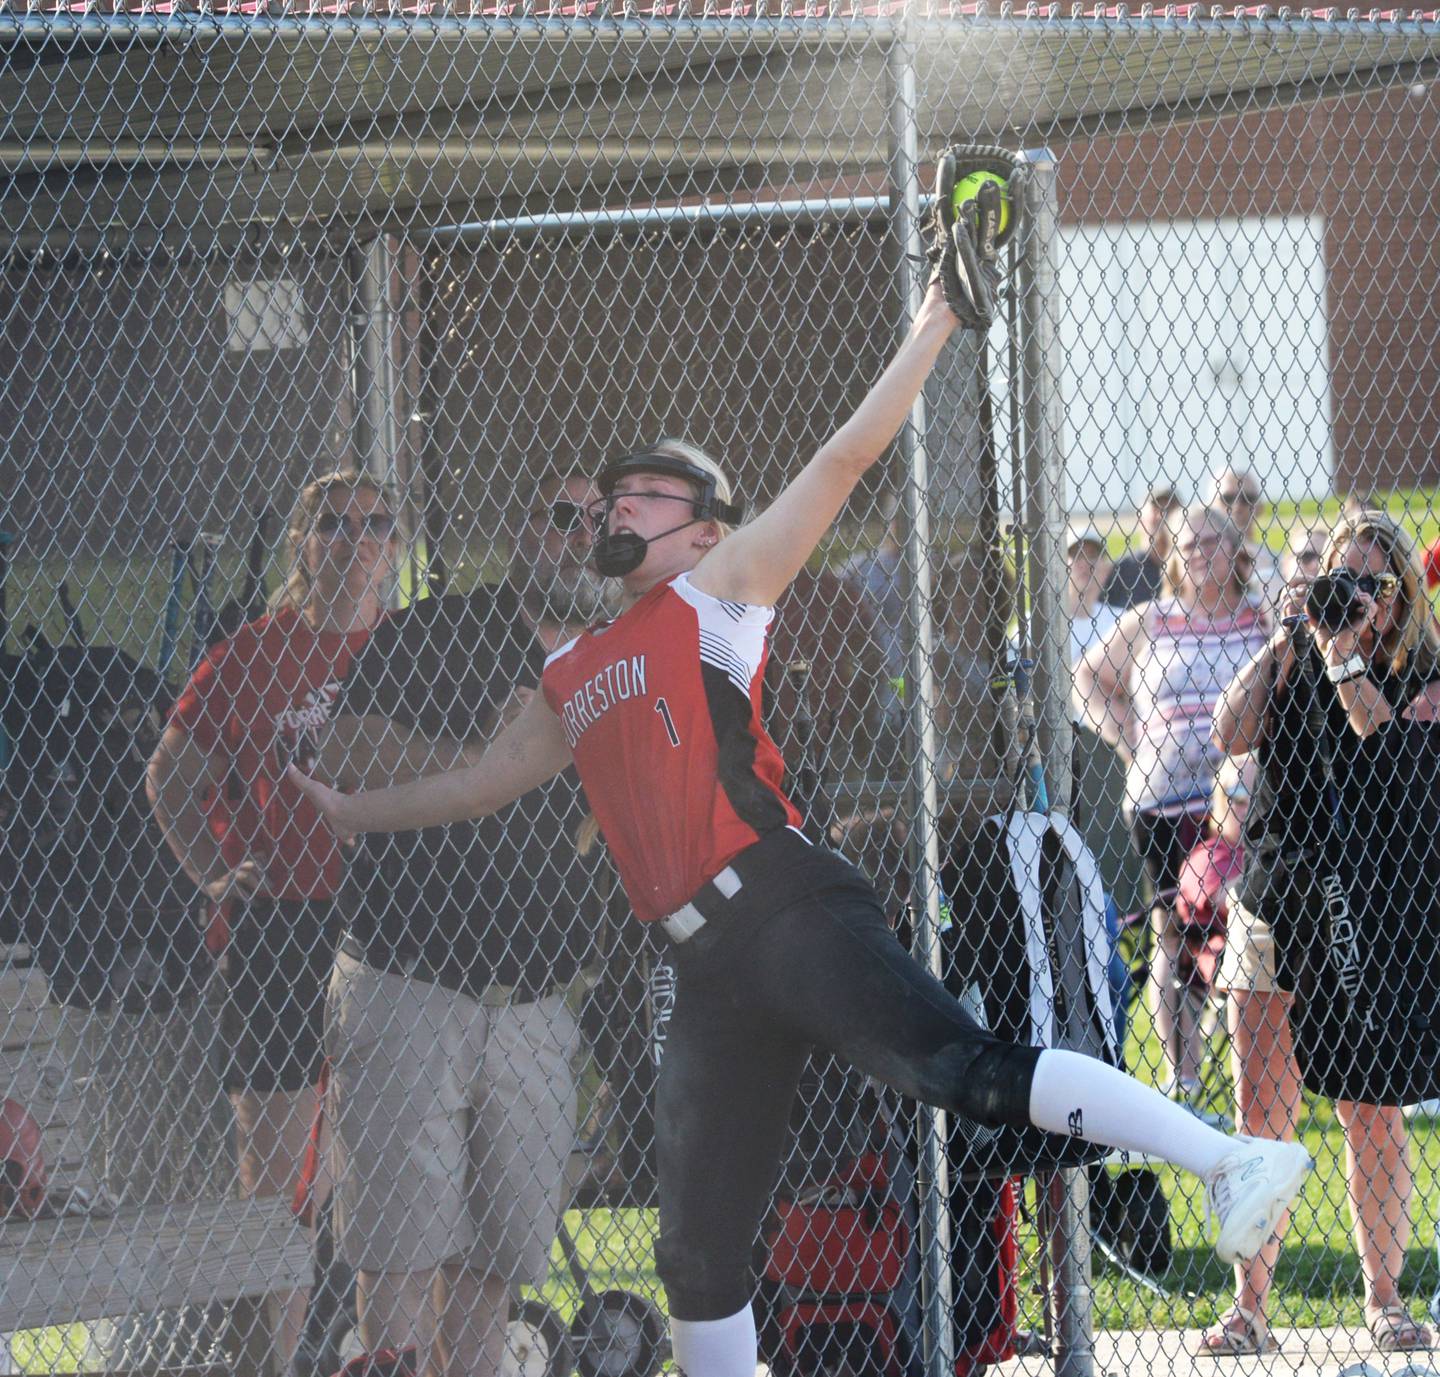 Forreston's Rylee Broshous catches a pop fly for an out during the 1A Forreston Sectional against Orangeville on Tuesday, May 23. The Cardinals lost the game 9-1.